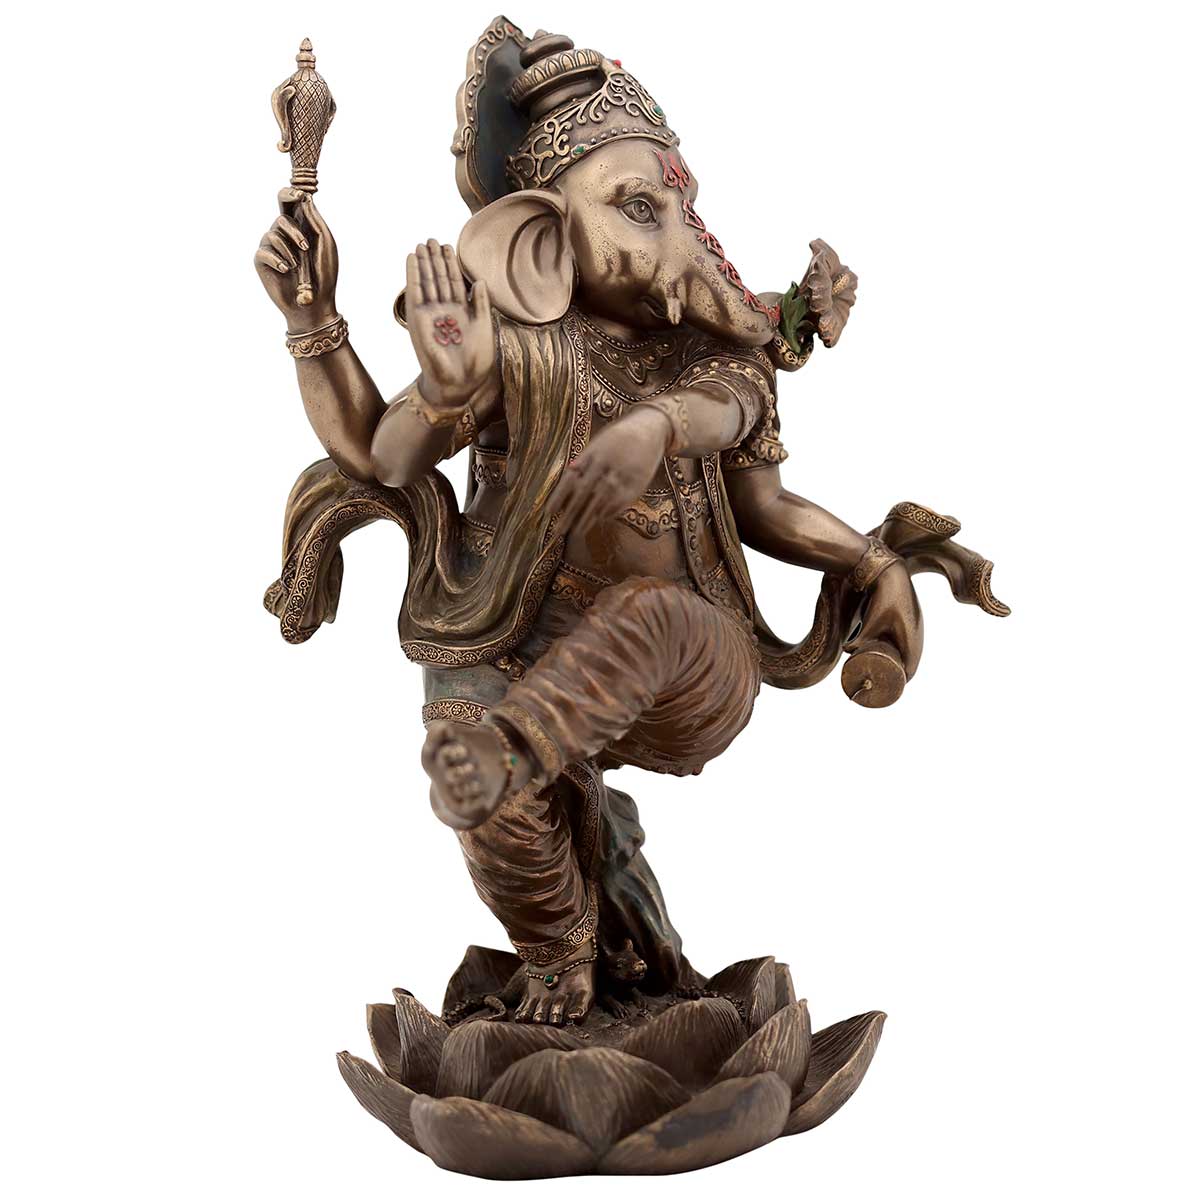 Ganesh Statue: Types and Home Placement